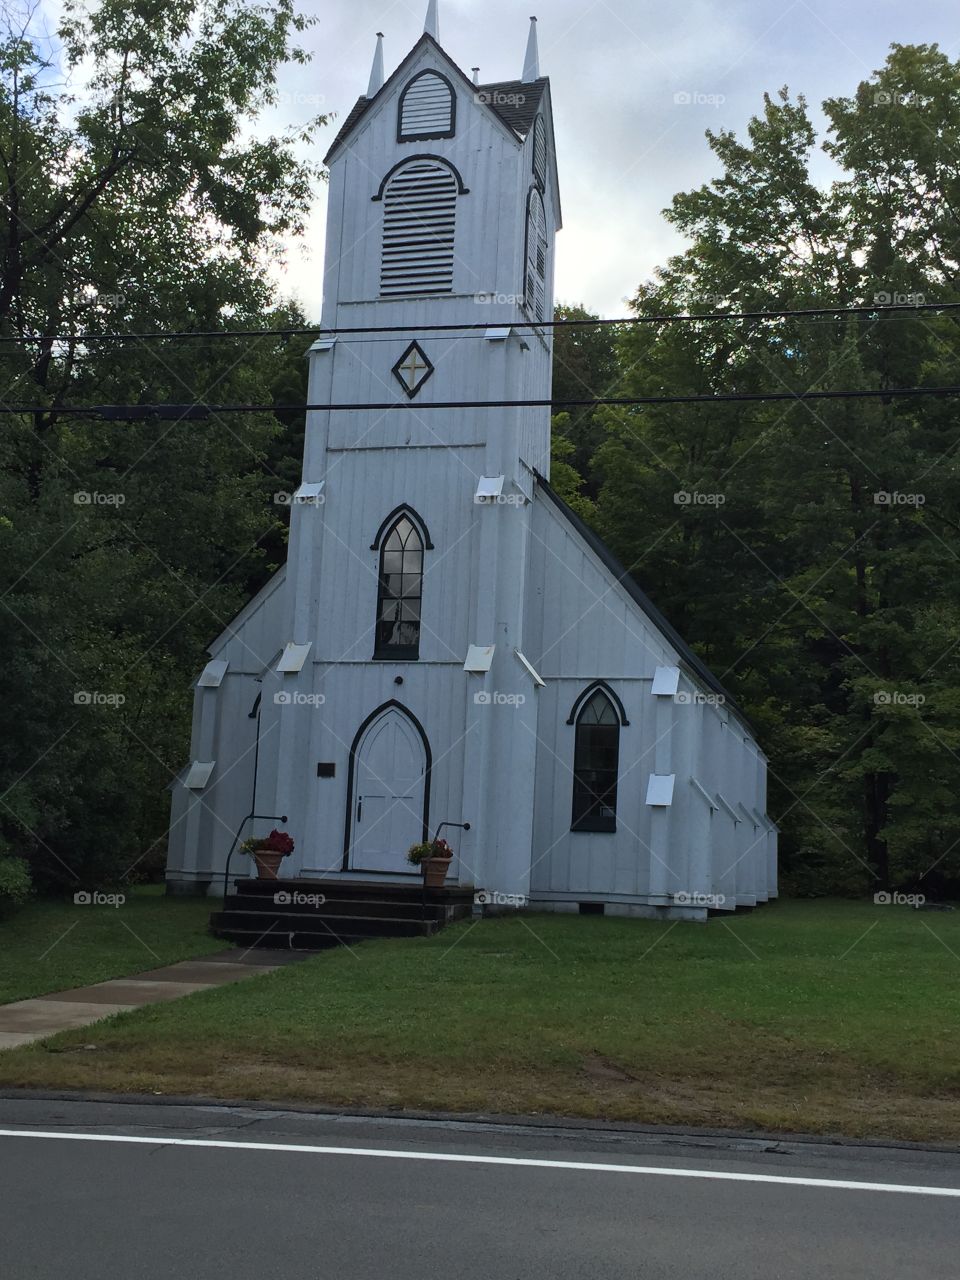 Old white church in Eagles Bay.  Opened only 10 weeks a year over the summer.  Non-denominational Christian services provided by volunteer pastors.